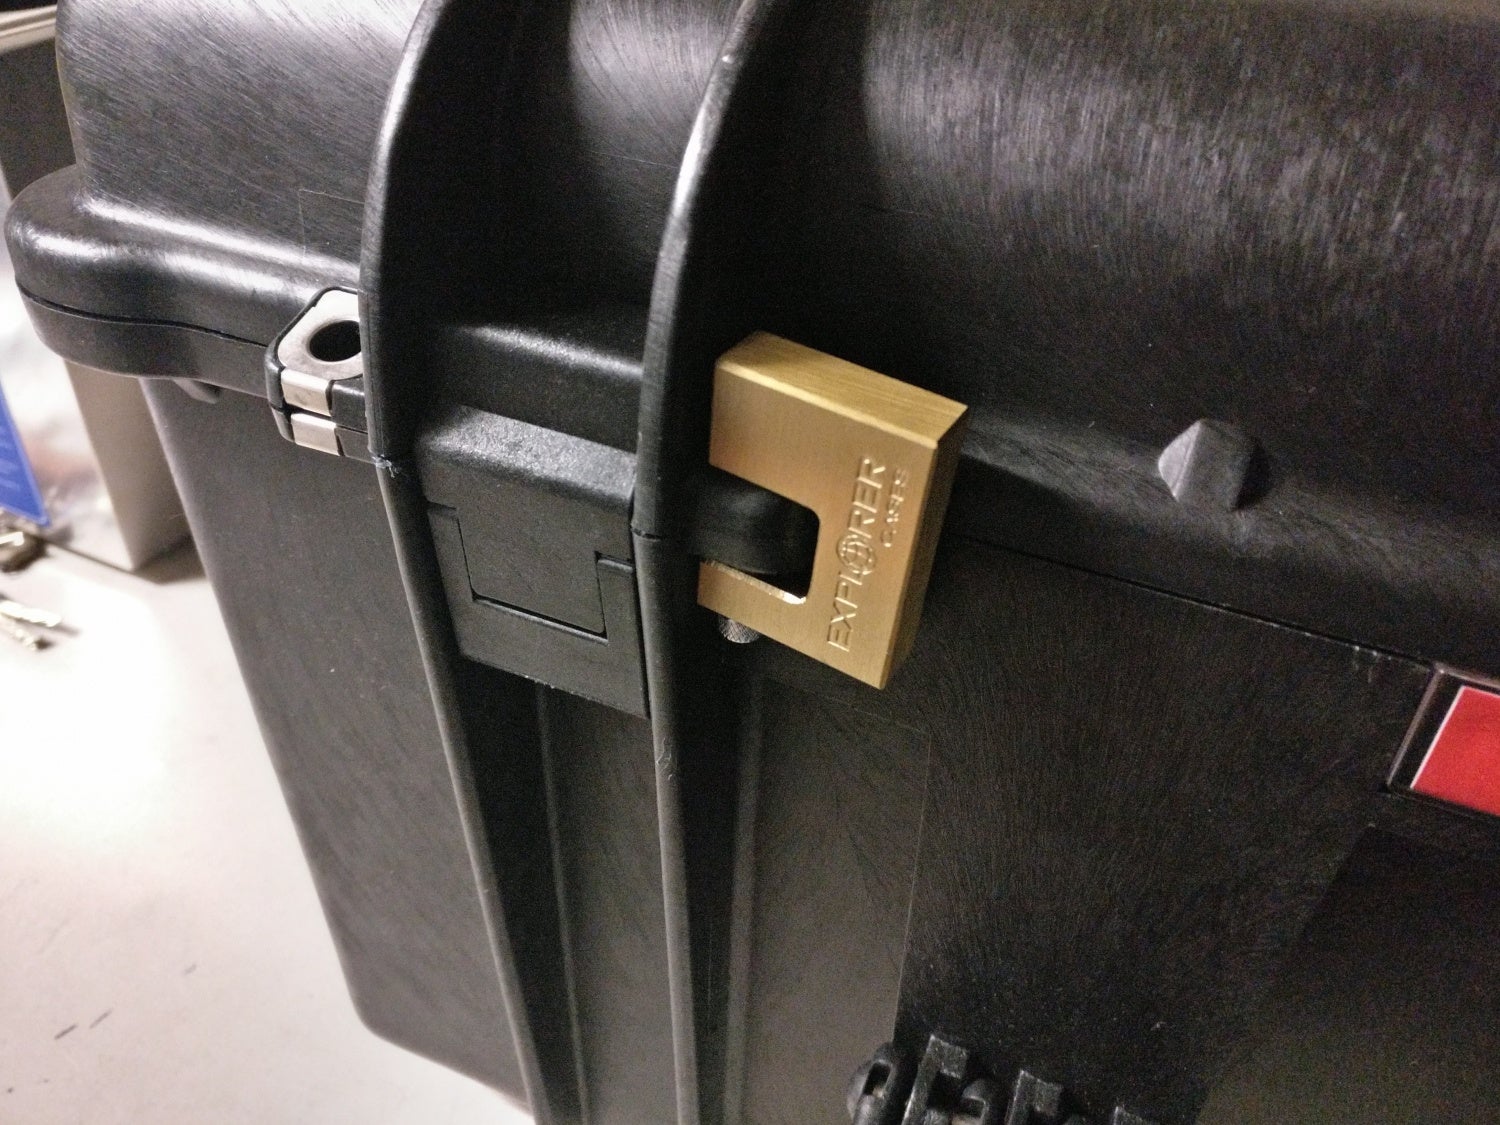 Brass keyed padlock affixed to a plastic hasp